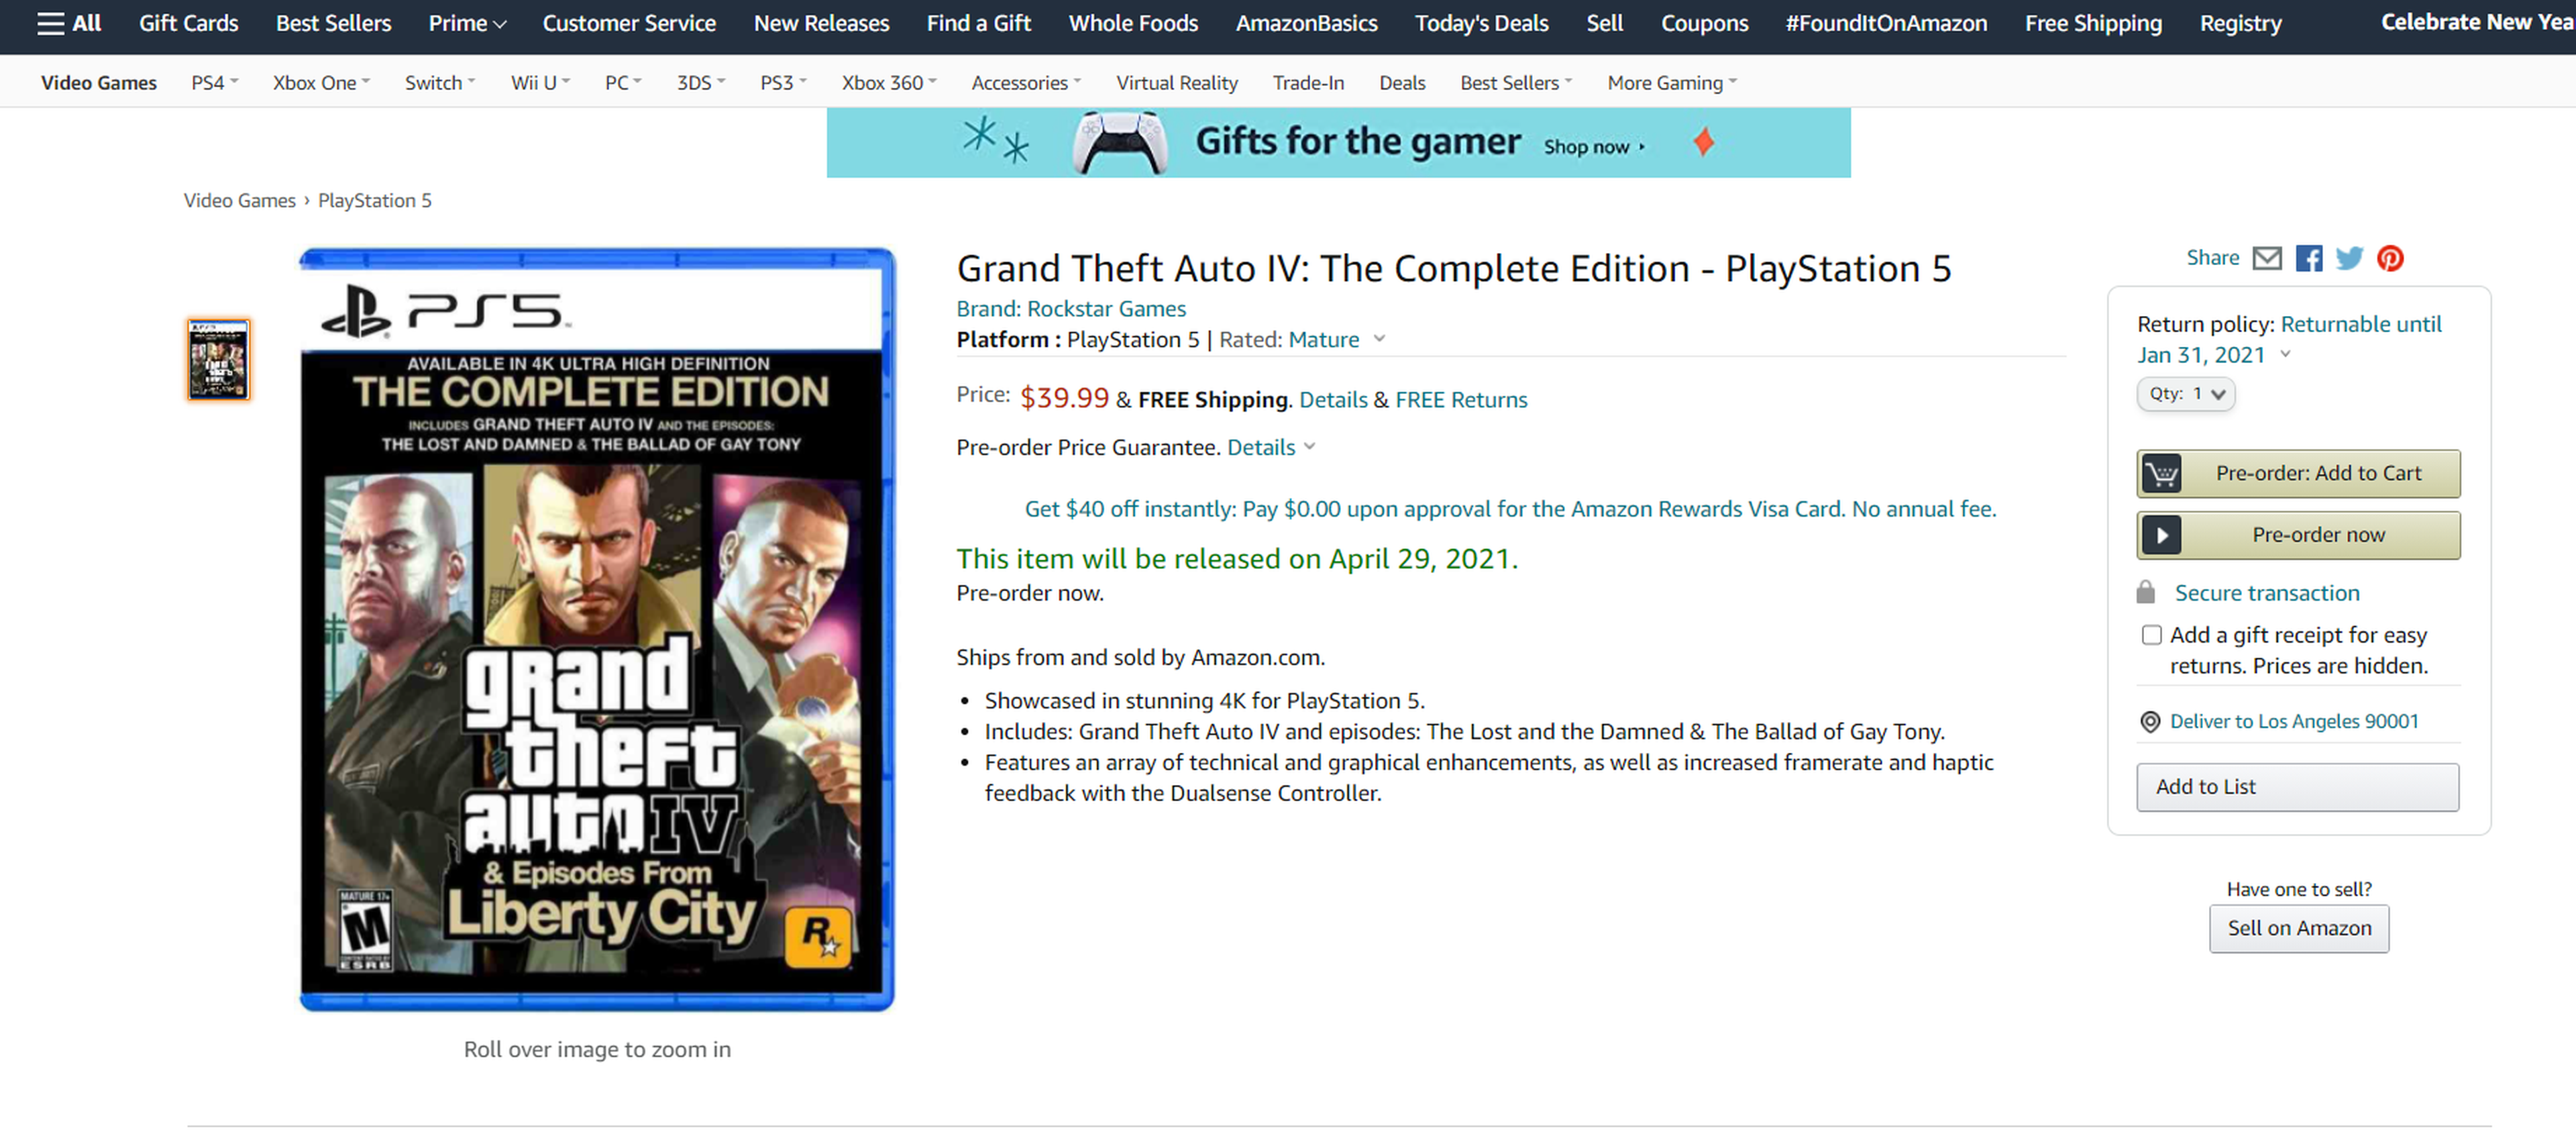 GTA IV: The Complete Edition PS5 Amazon